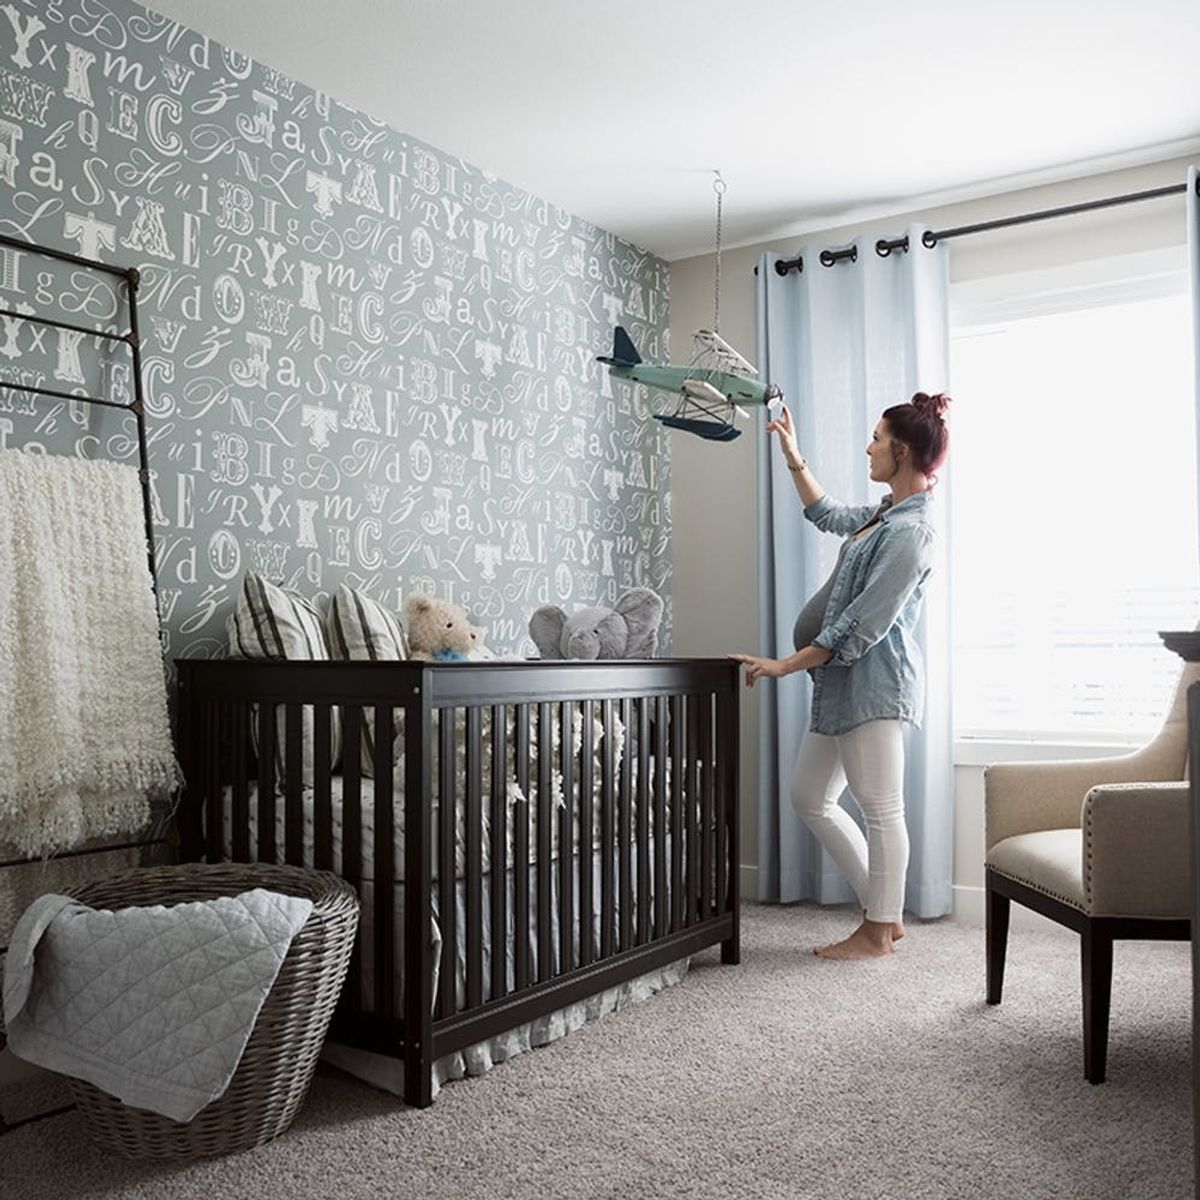 10+ Must-Know Design Tips for Your New Nursery